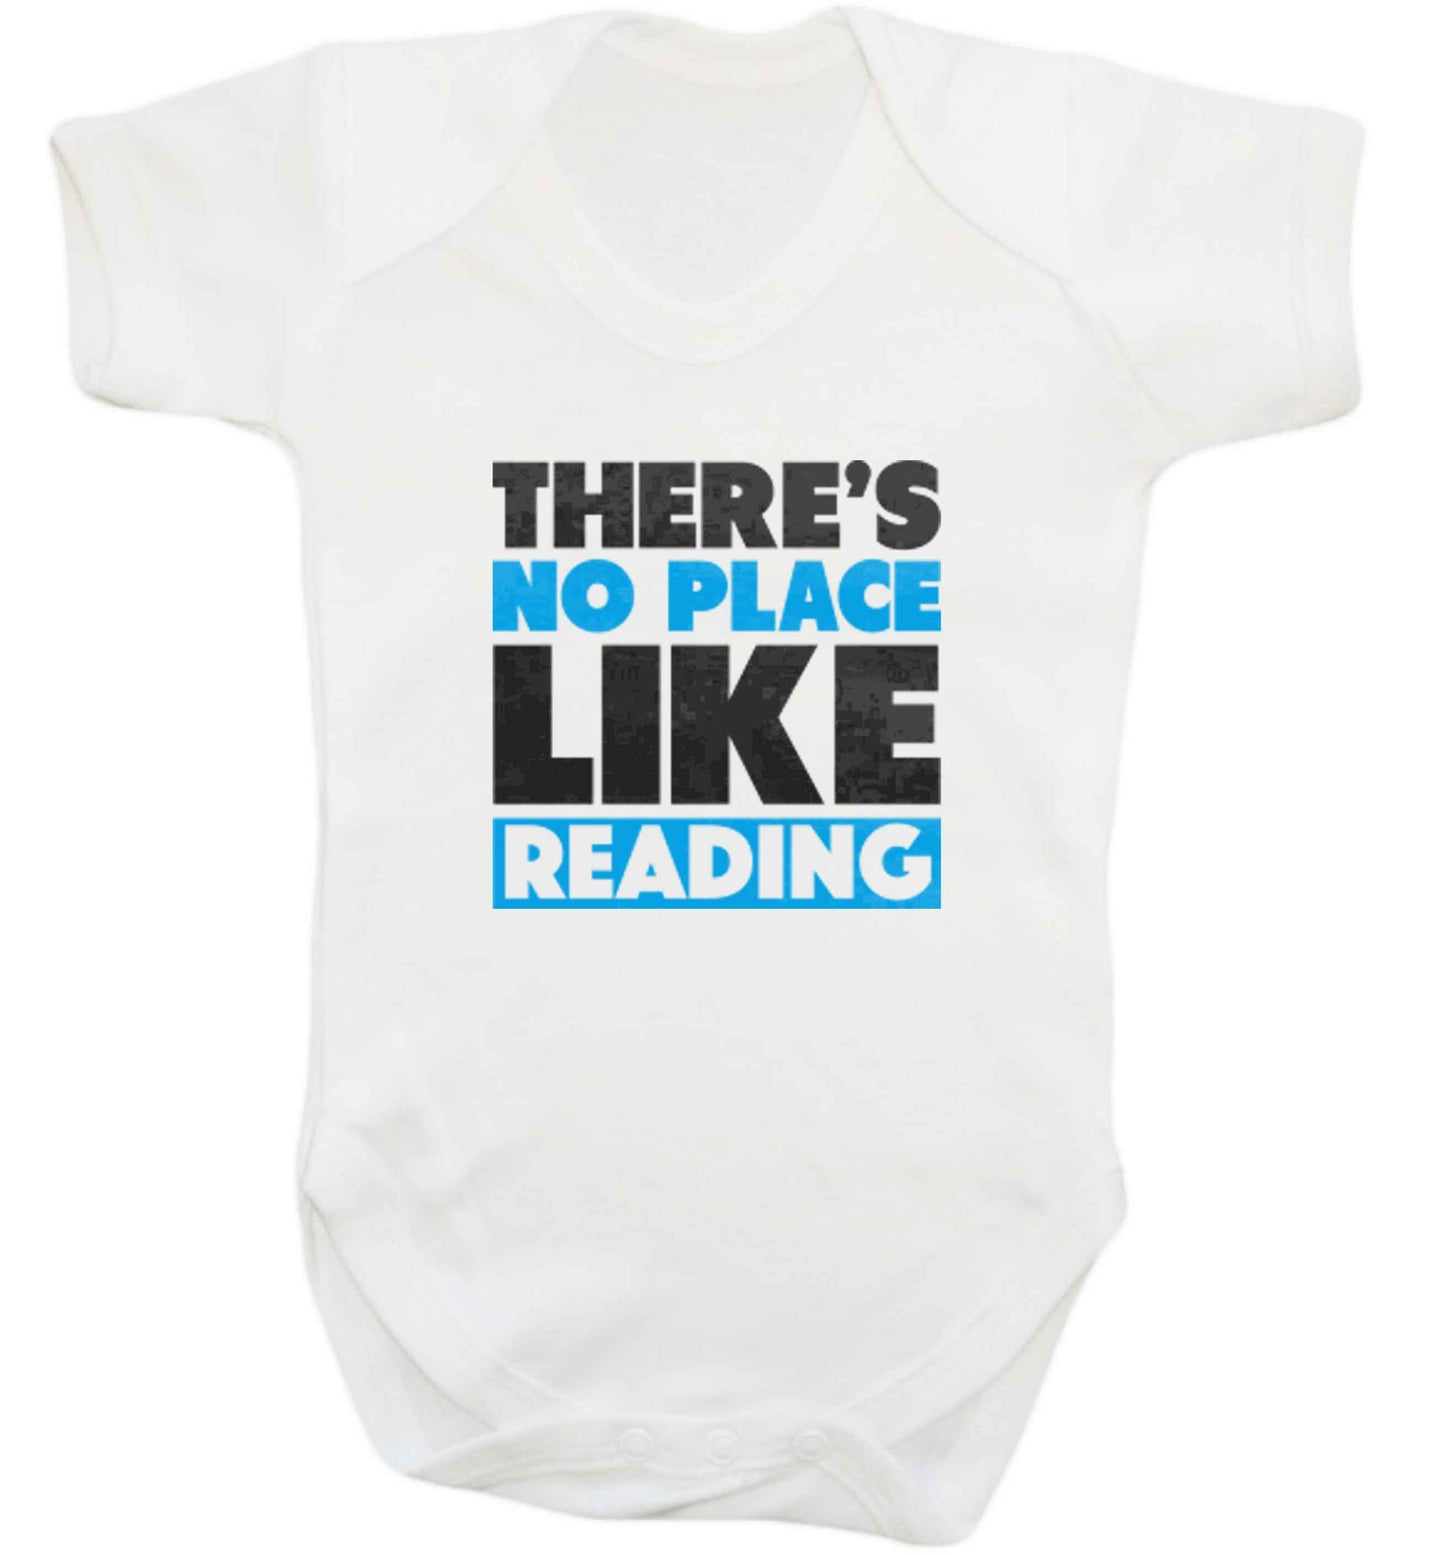 There's no place like Readingbaby vest white 18-24 months